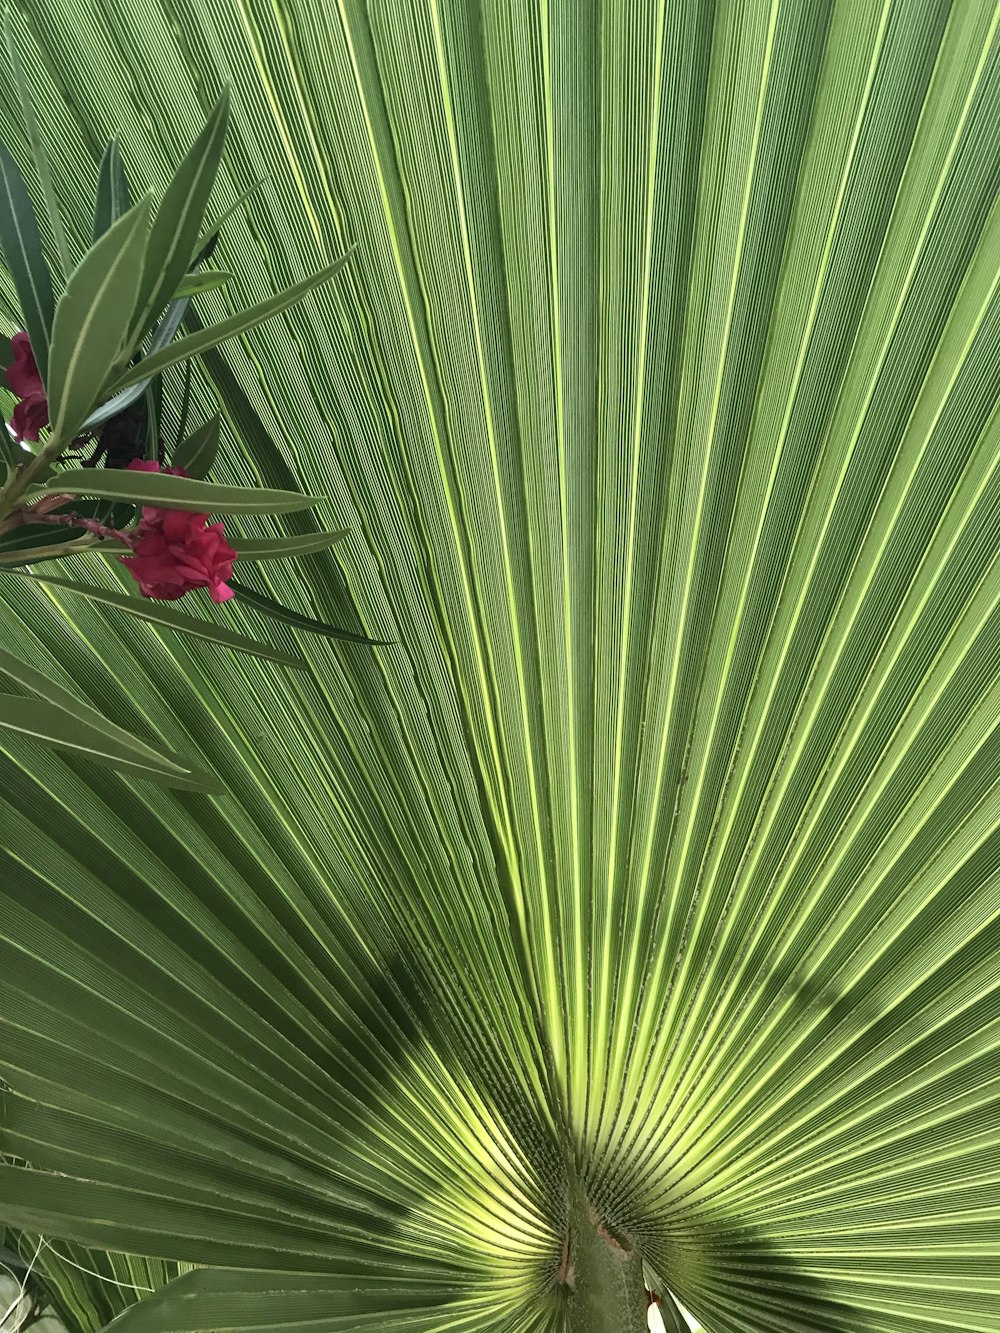 a close up of a palm leaf with a red flower